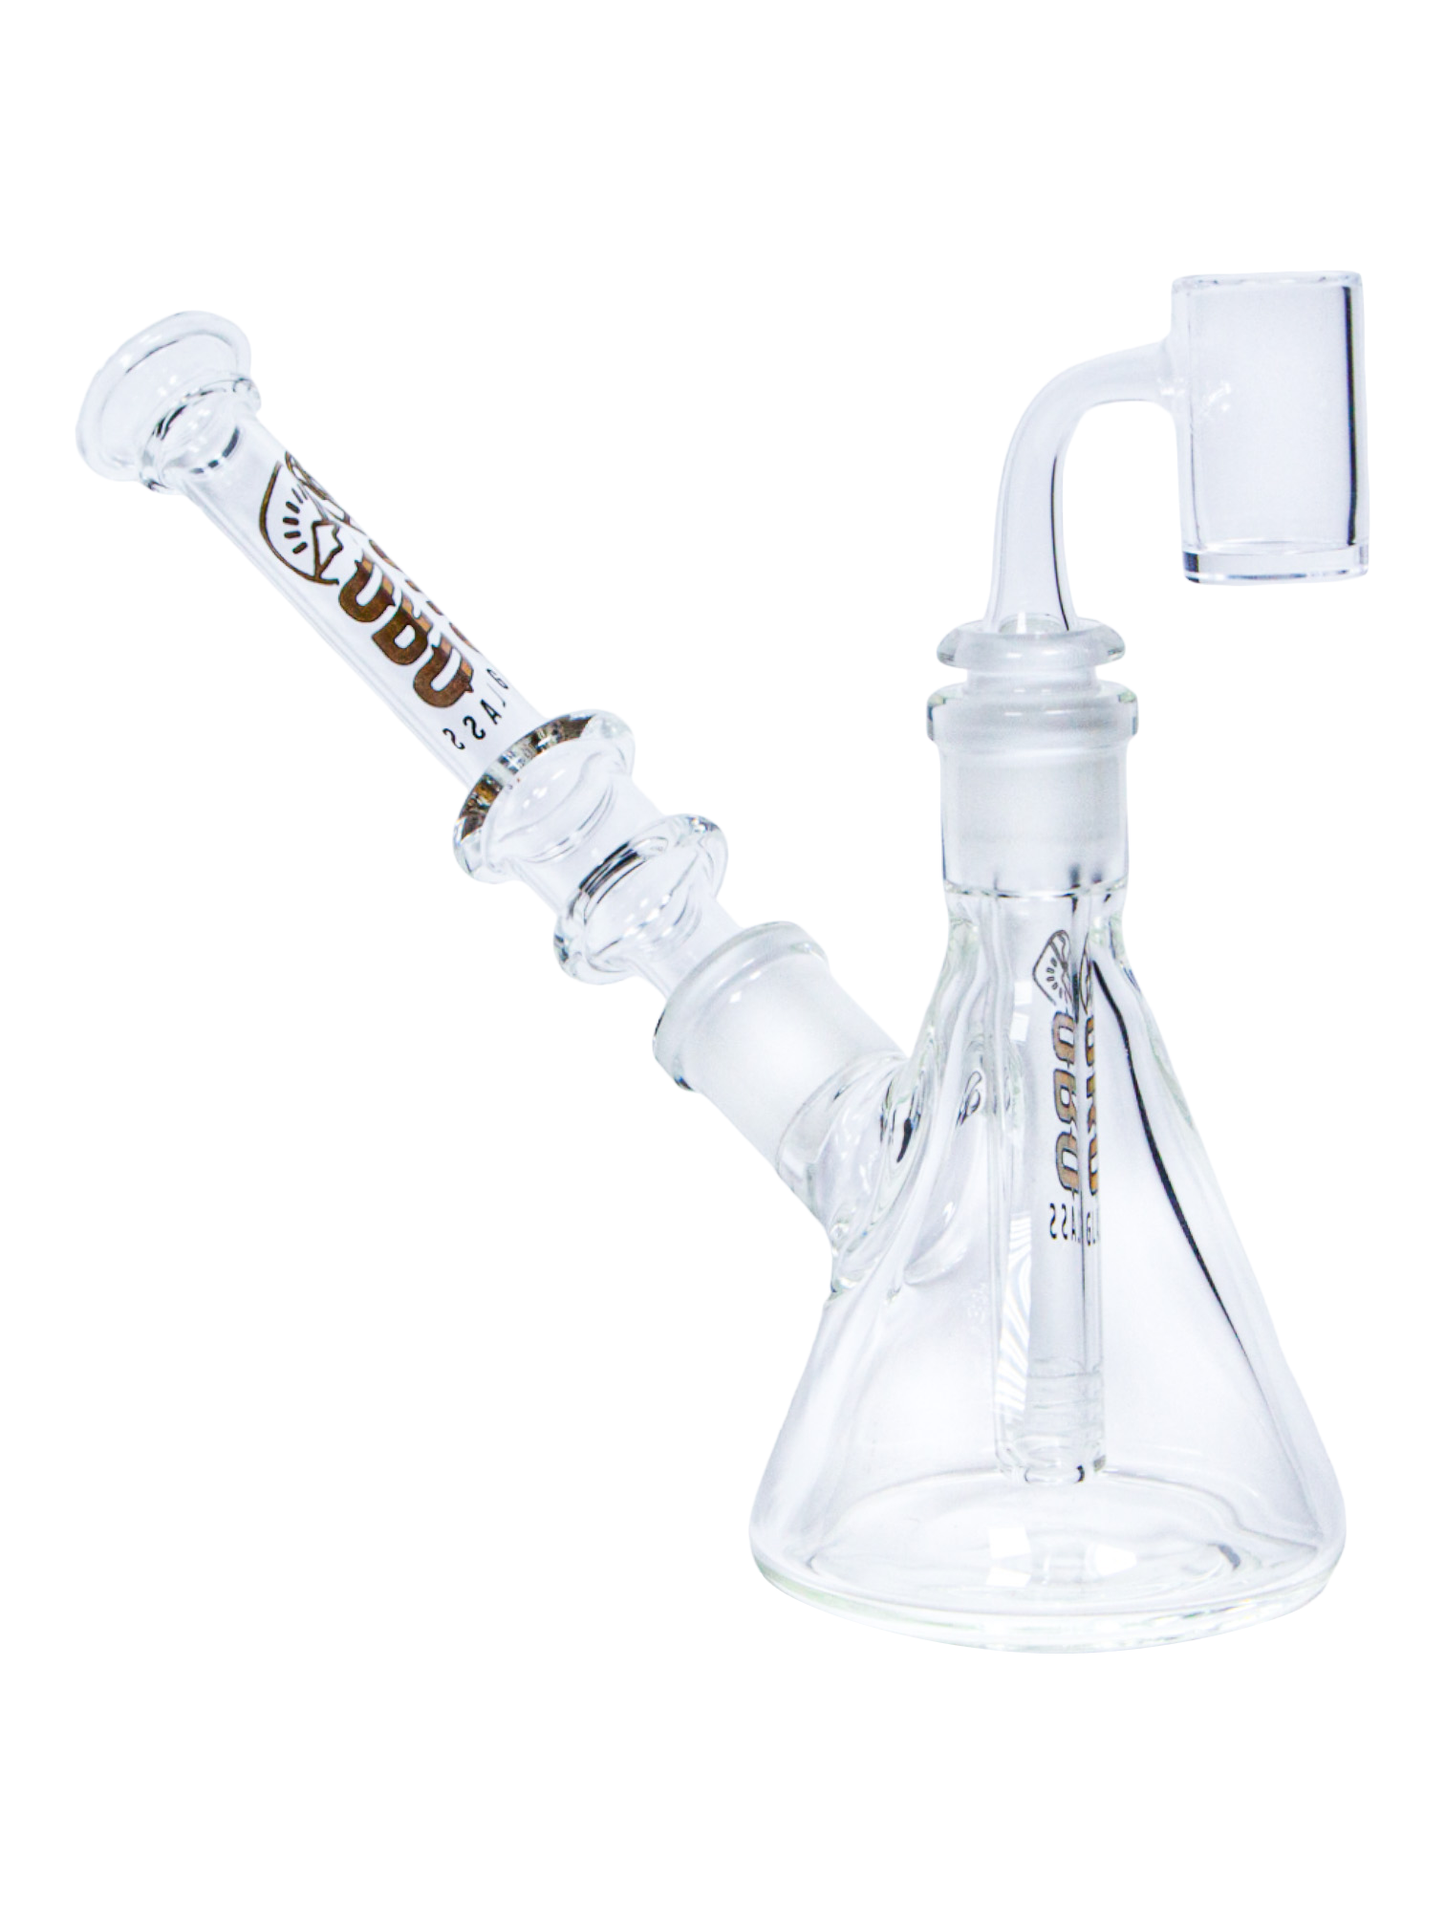 An Oro Glass Company Highbanker Modular Water Pipe set up as a dab rig.